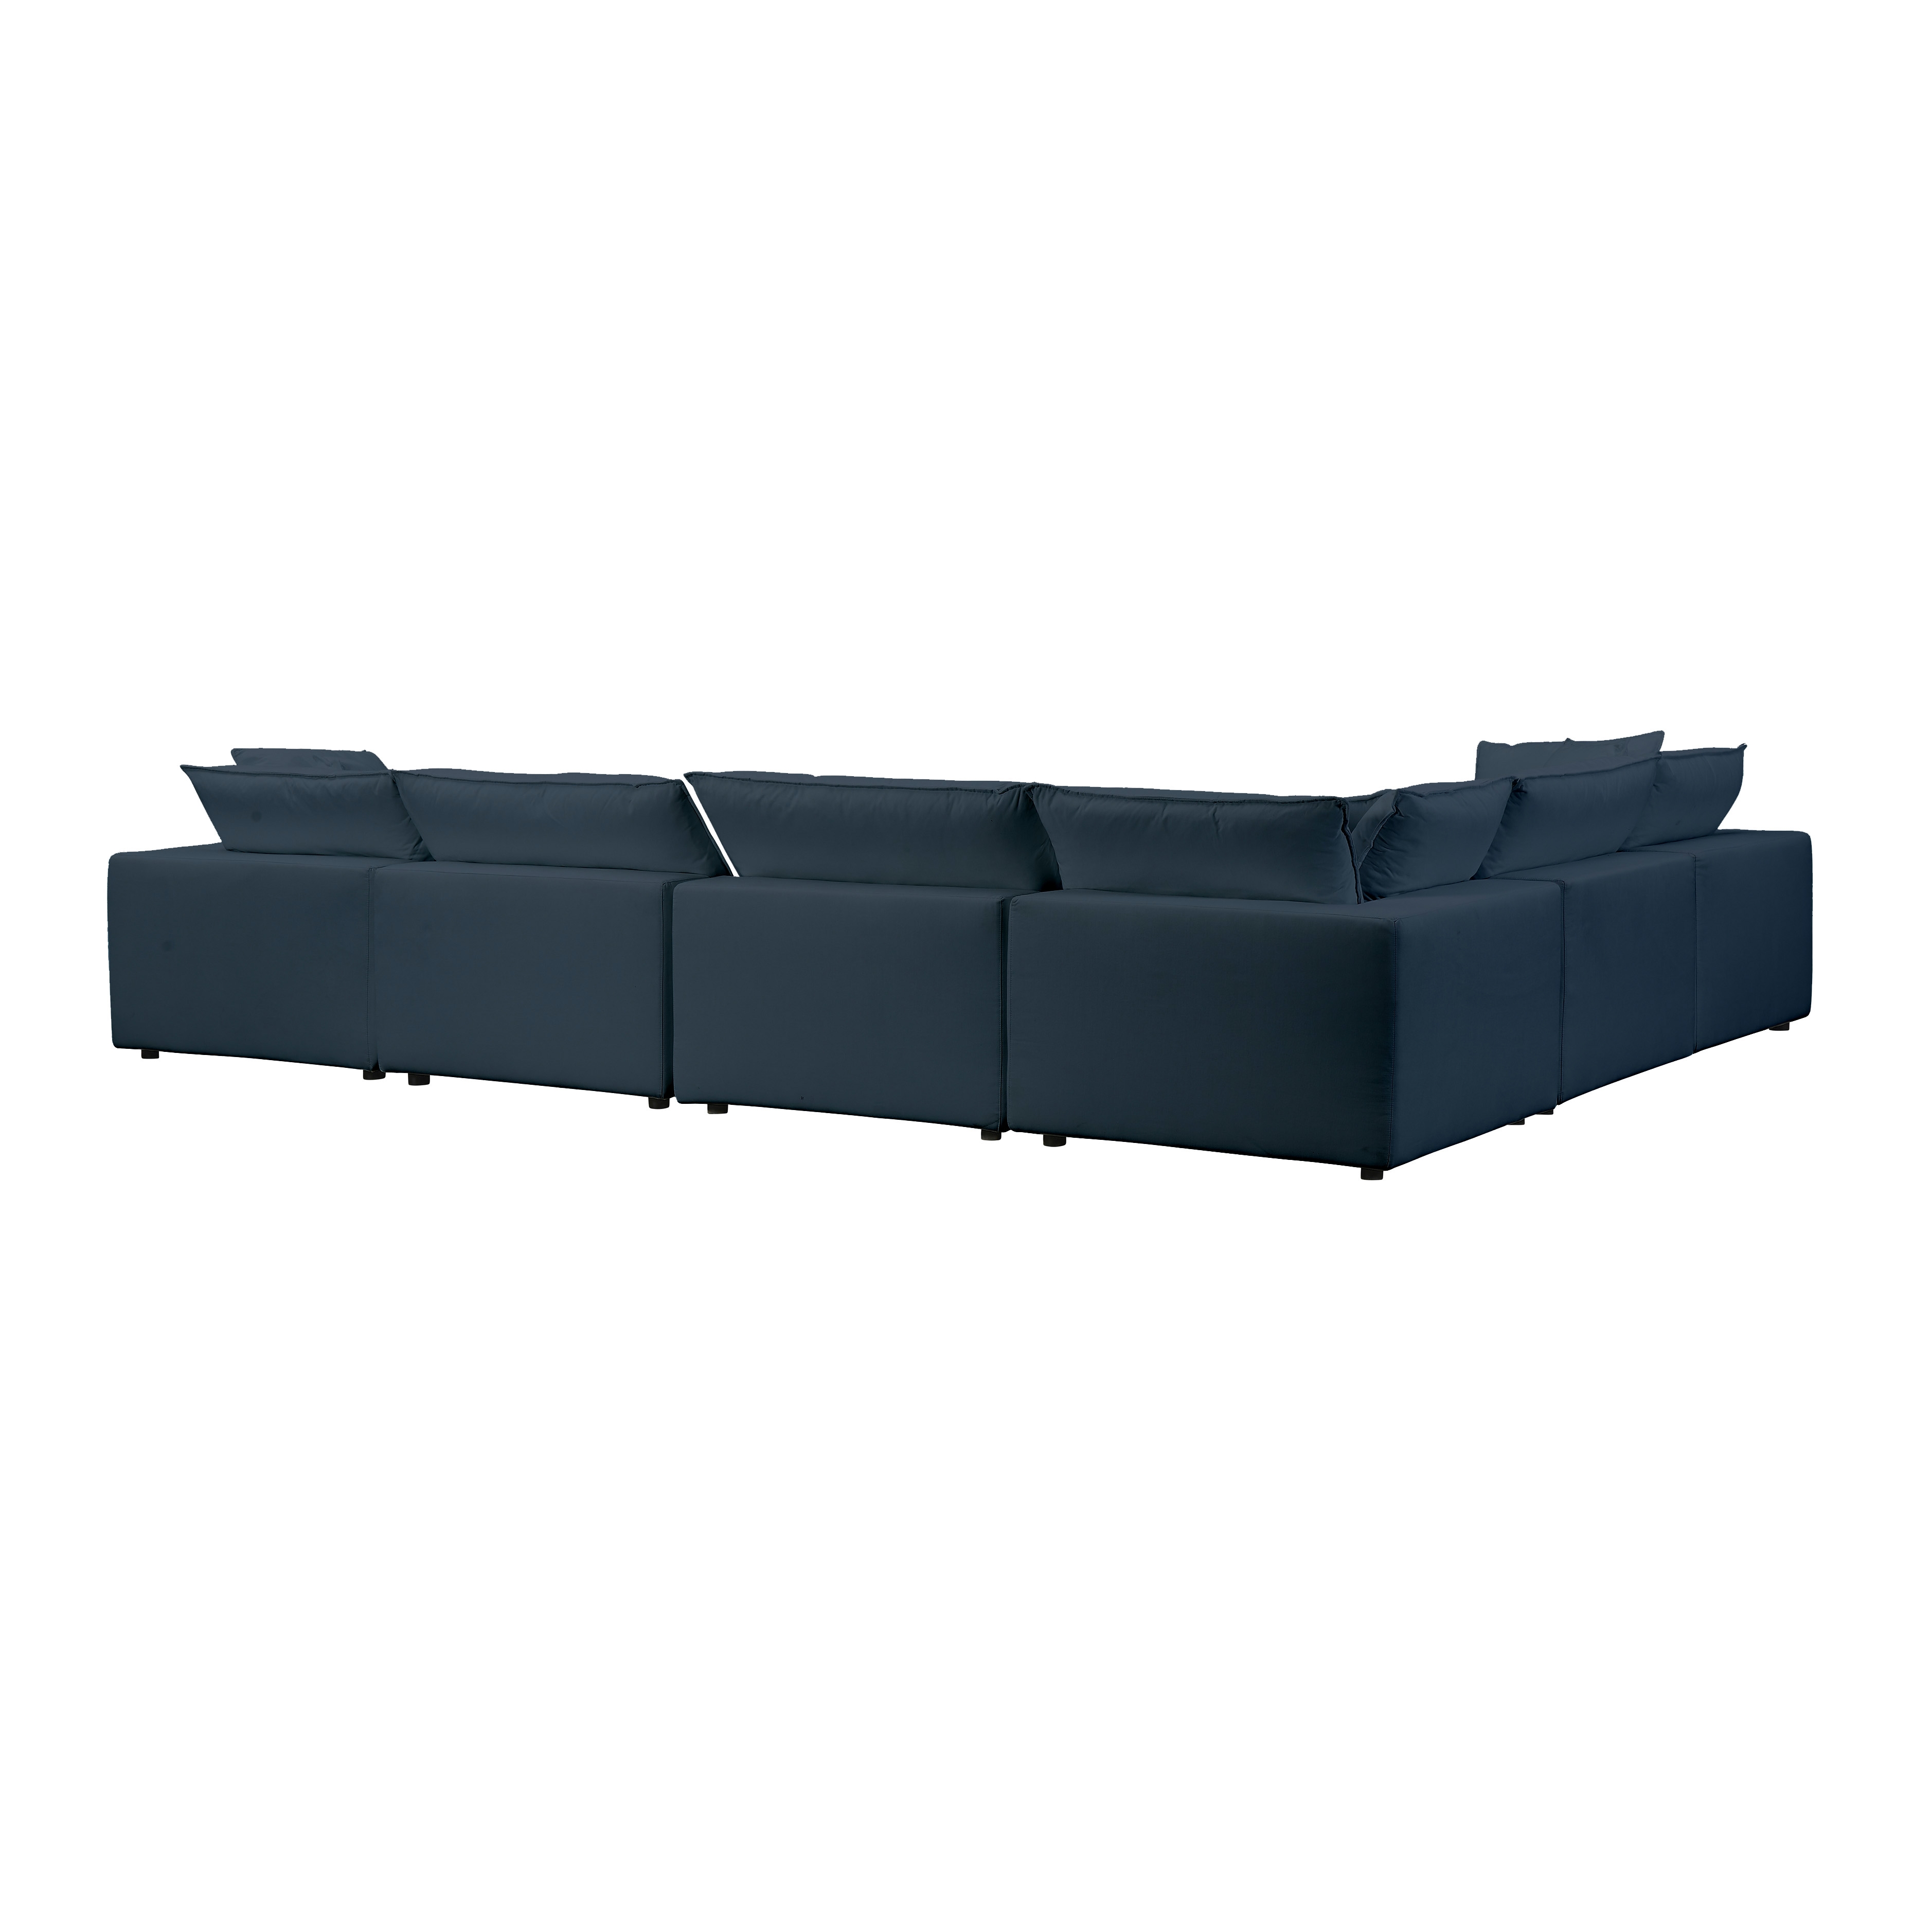 Cali Navy Modular Large Chaise Sectional - Image 3